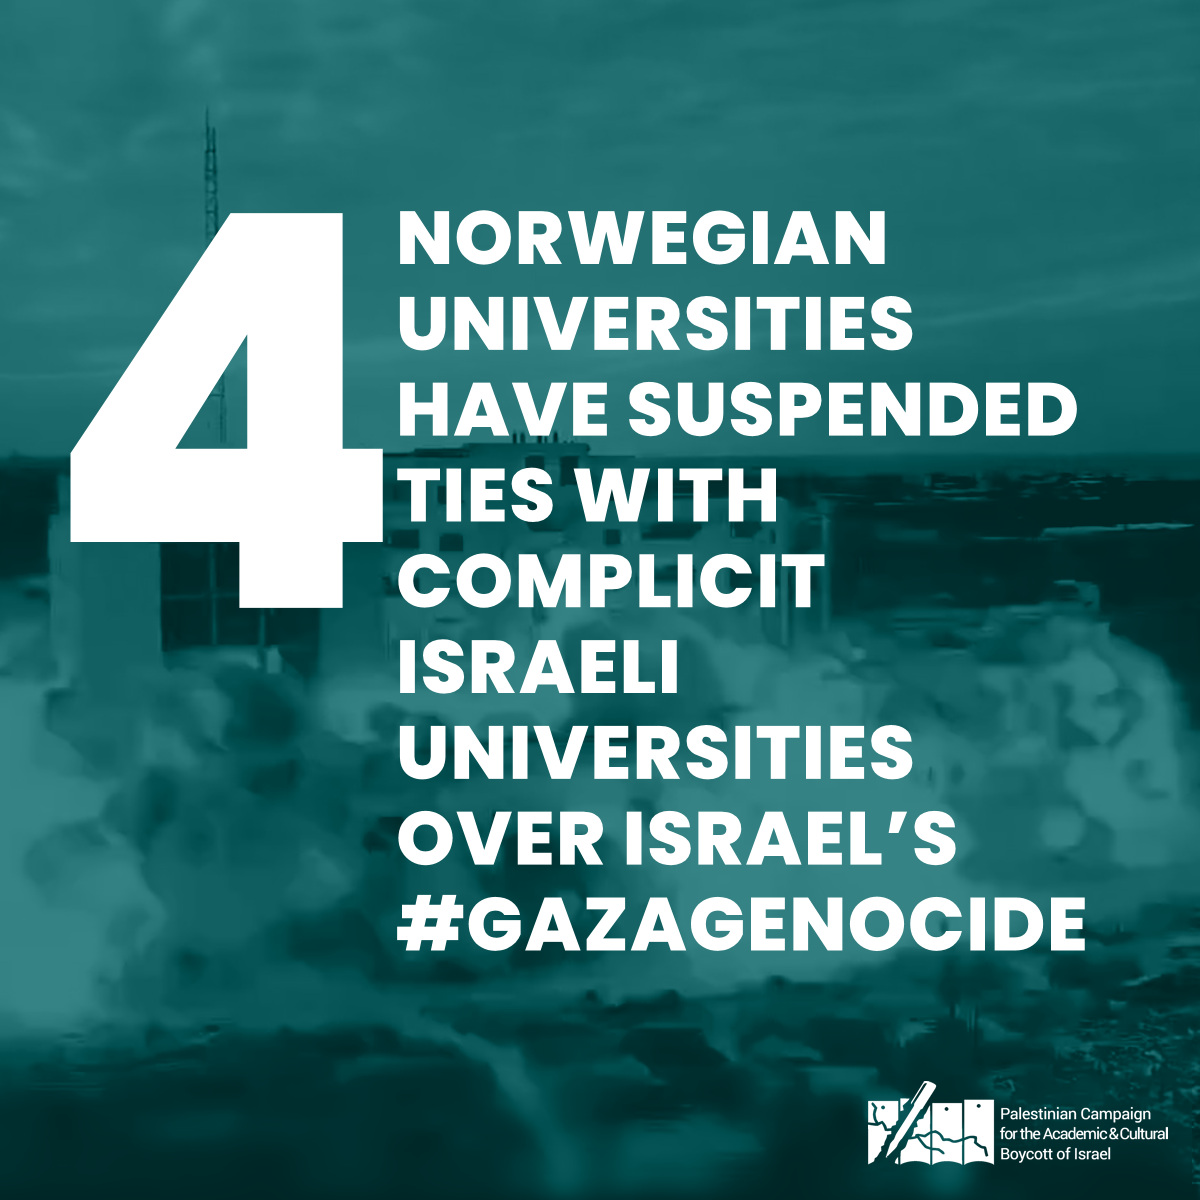 We welcome the news that four Norwegian universities have suspended ties with complicit Israeli universities over Israel’s #GazaGenocide. This is what Palestinians, including universities and faculty unions, are calling for as the most effective means of solidarity. 🧵